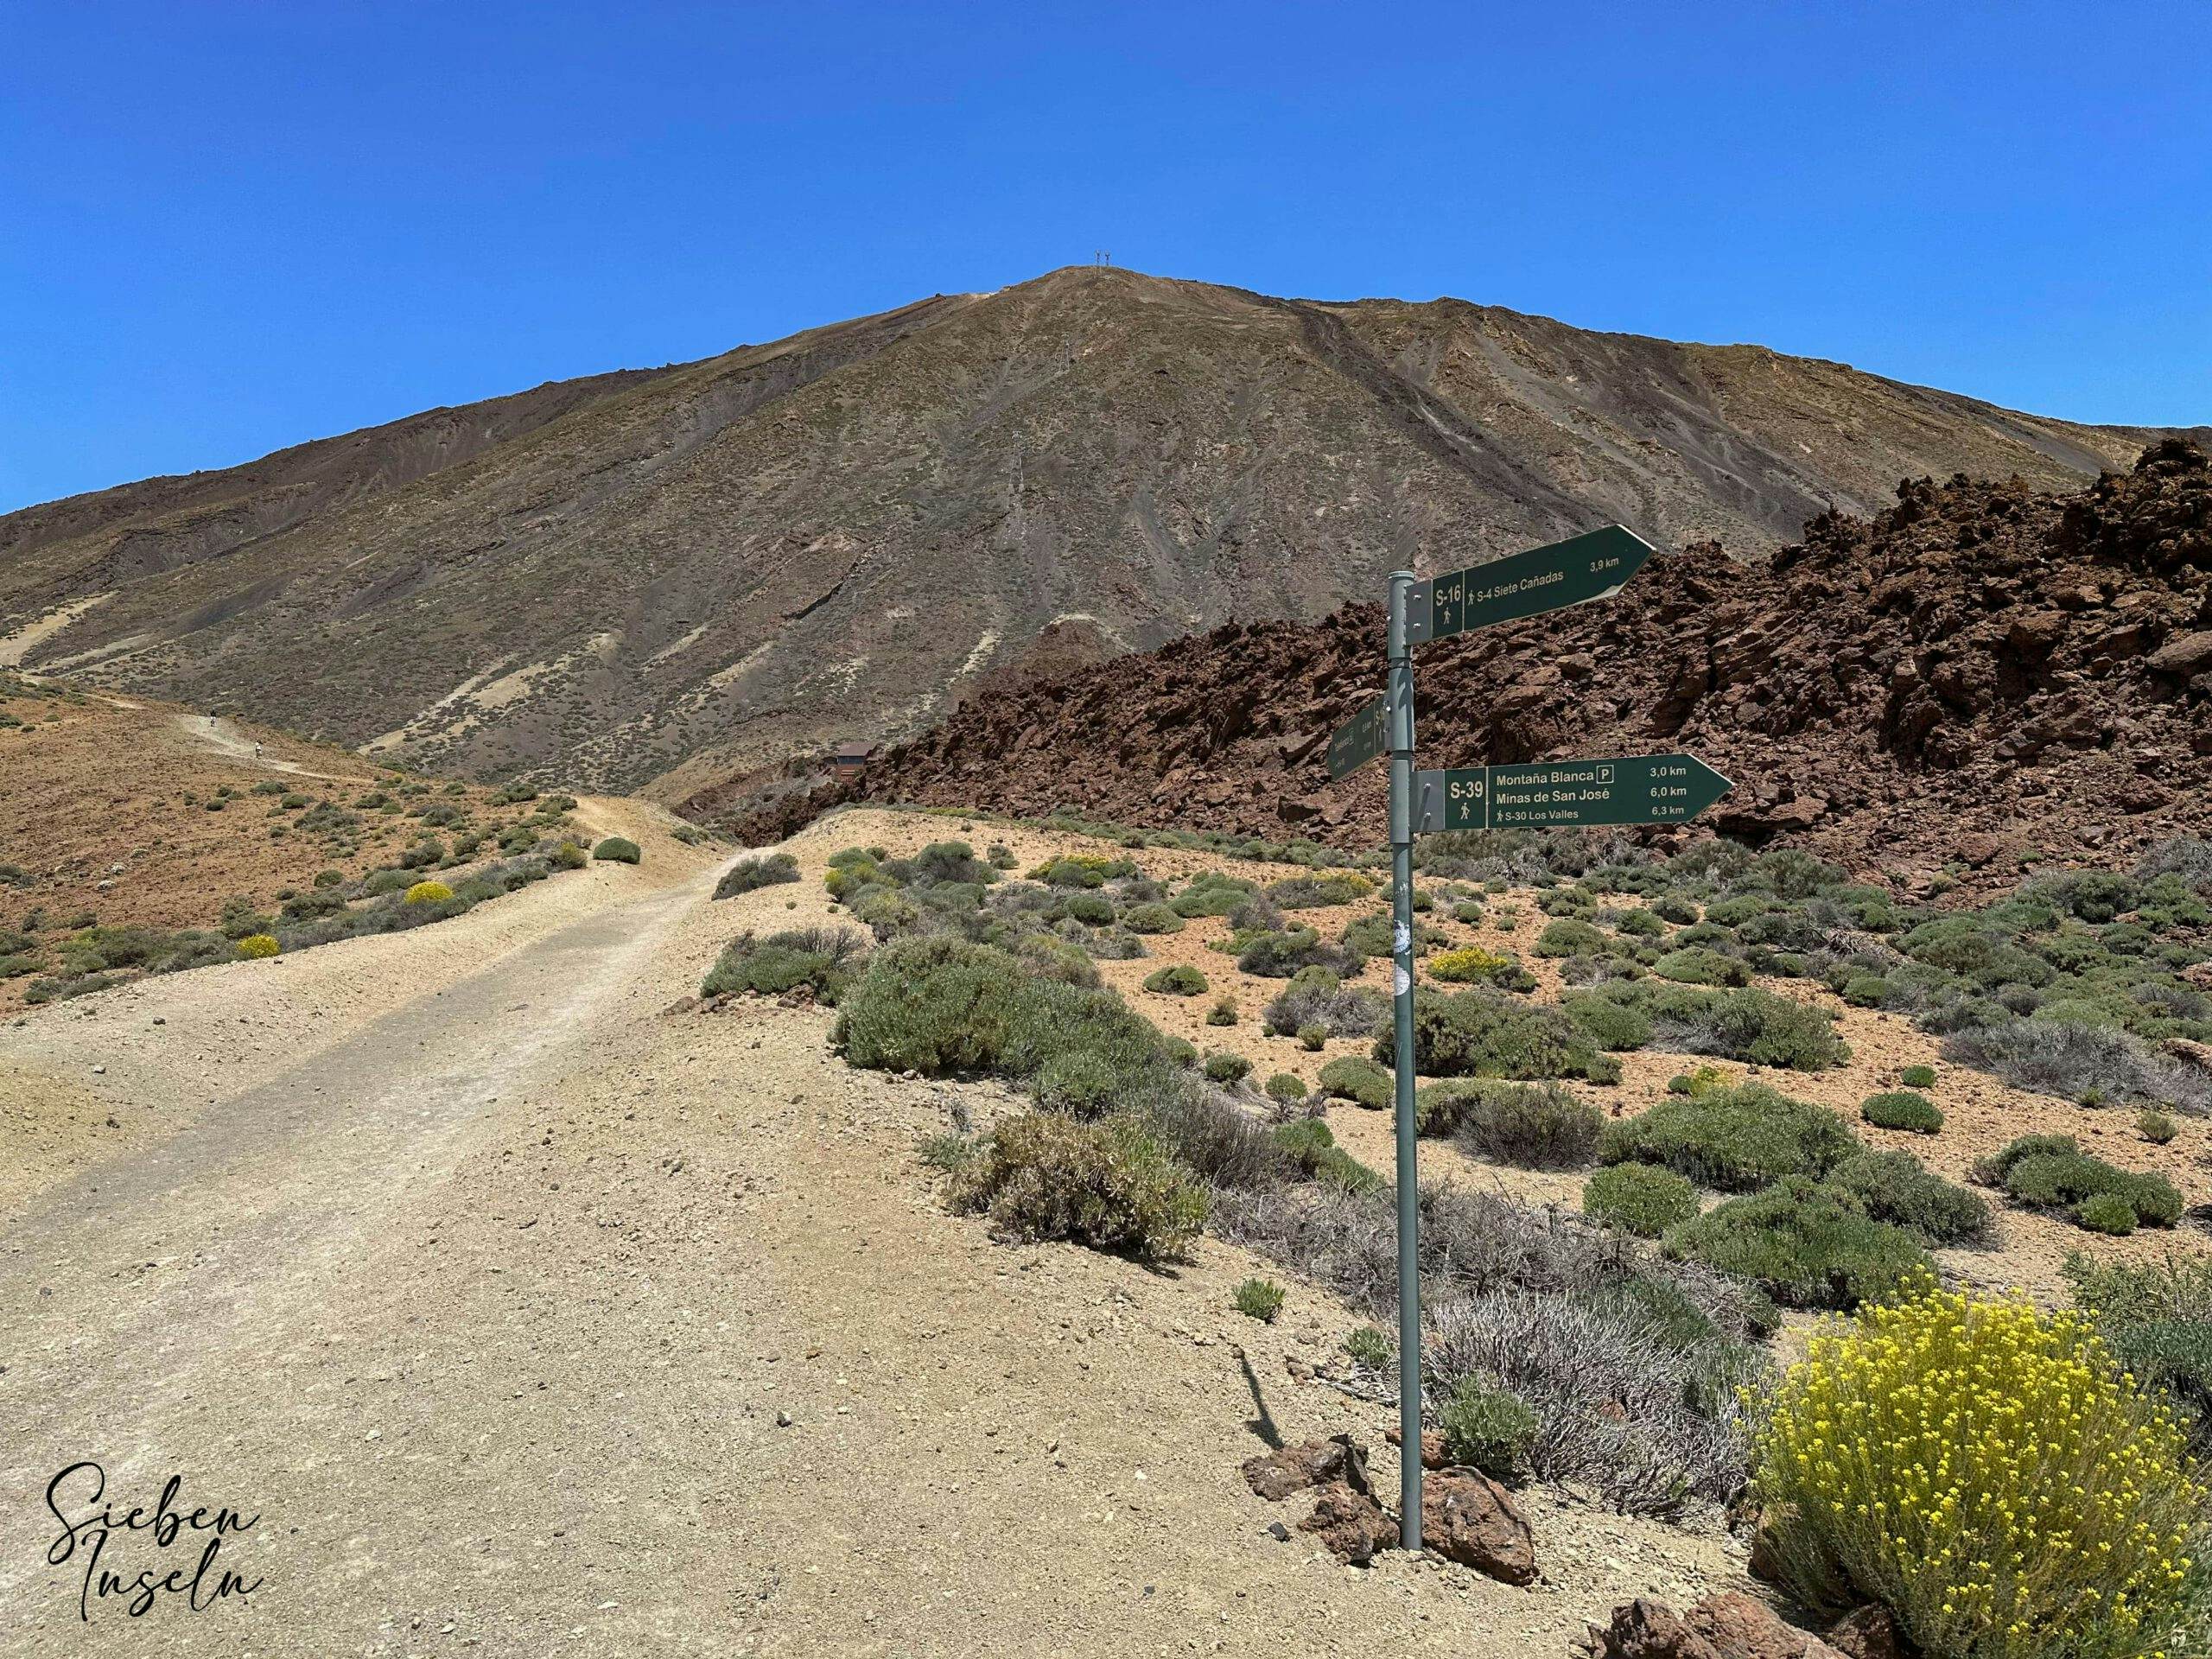 Hiking junction before Teide junction S-39 from S-16